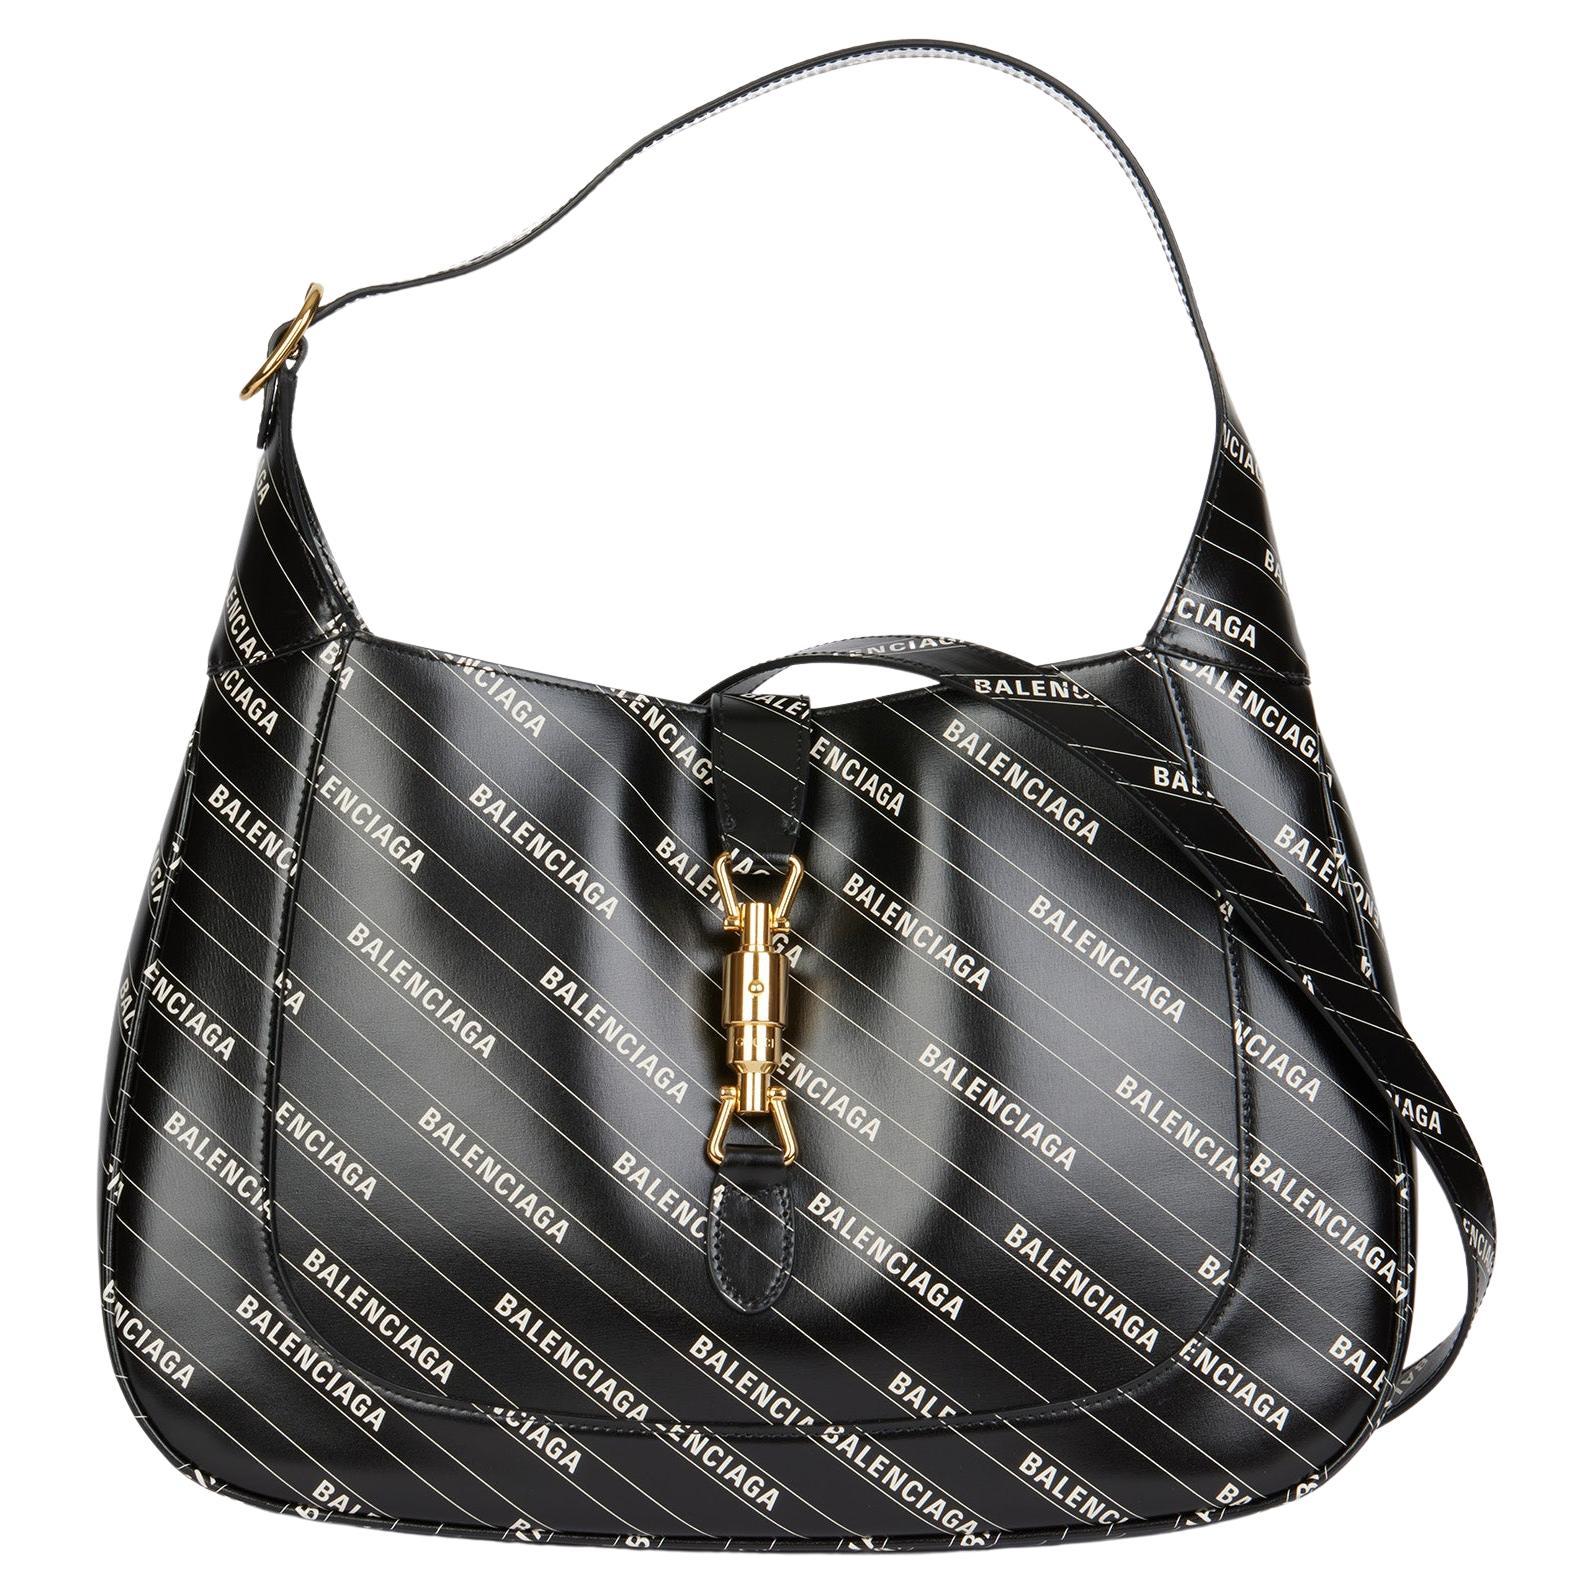 Vintage Gucci: Clothing, Bags & More - 7,839 For Sale at 1stdibs